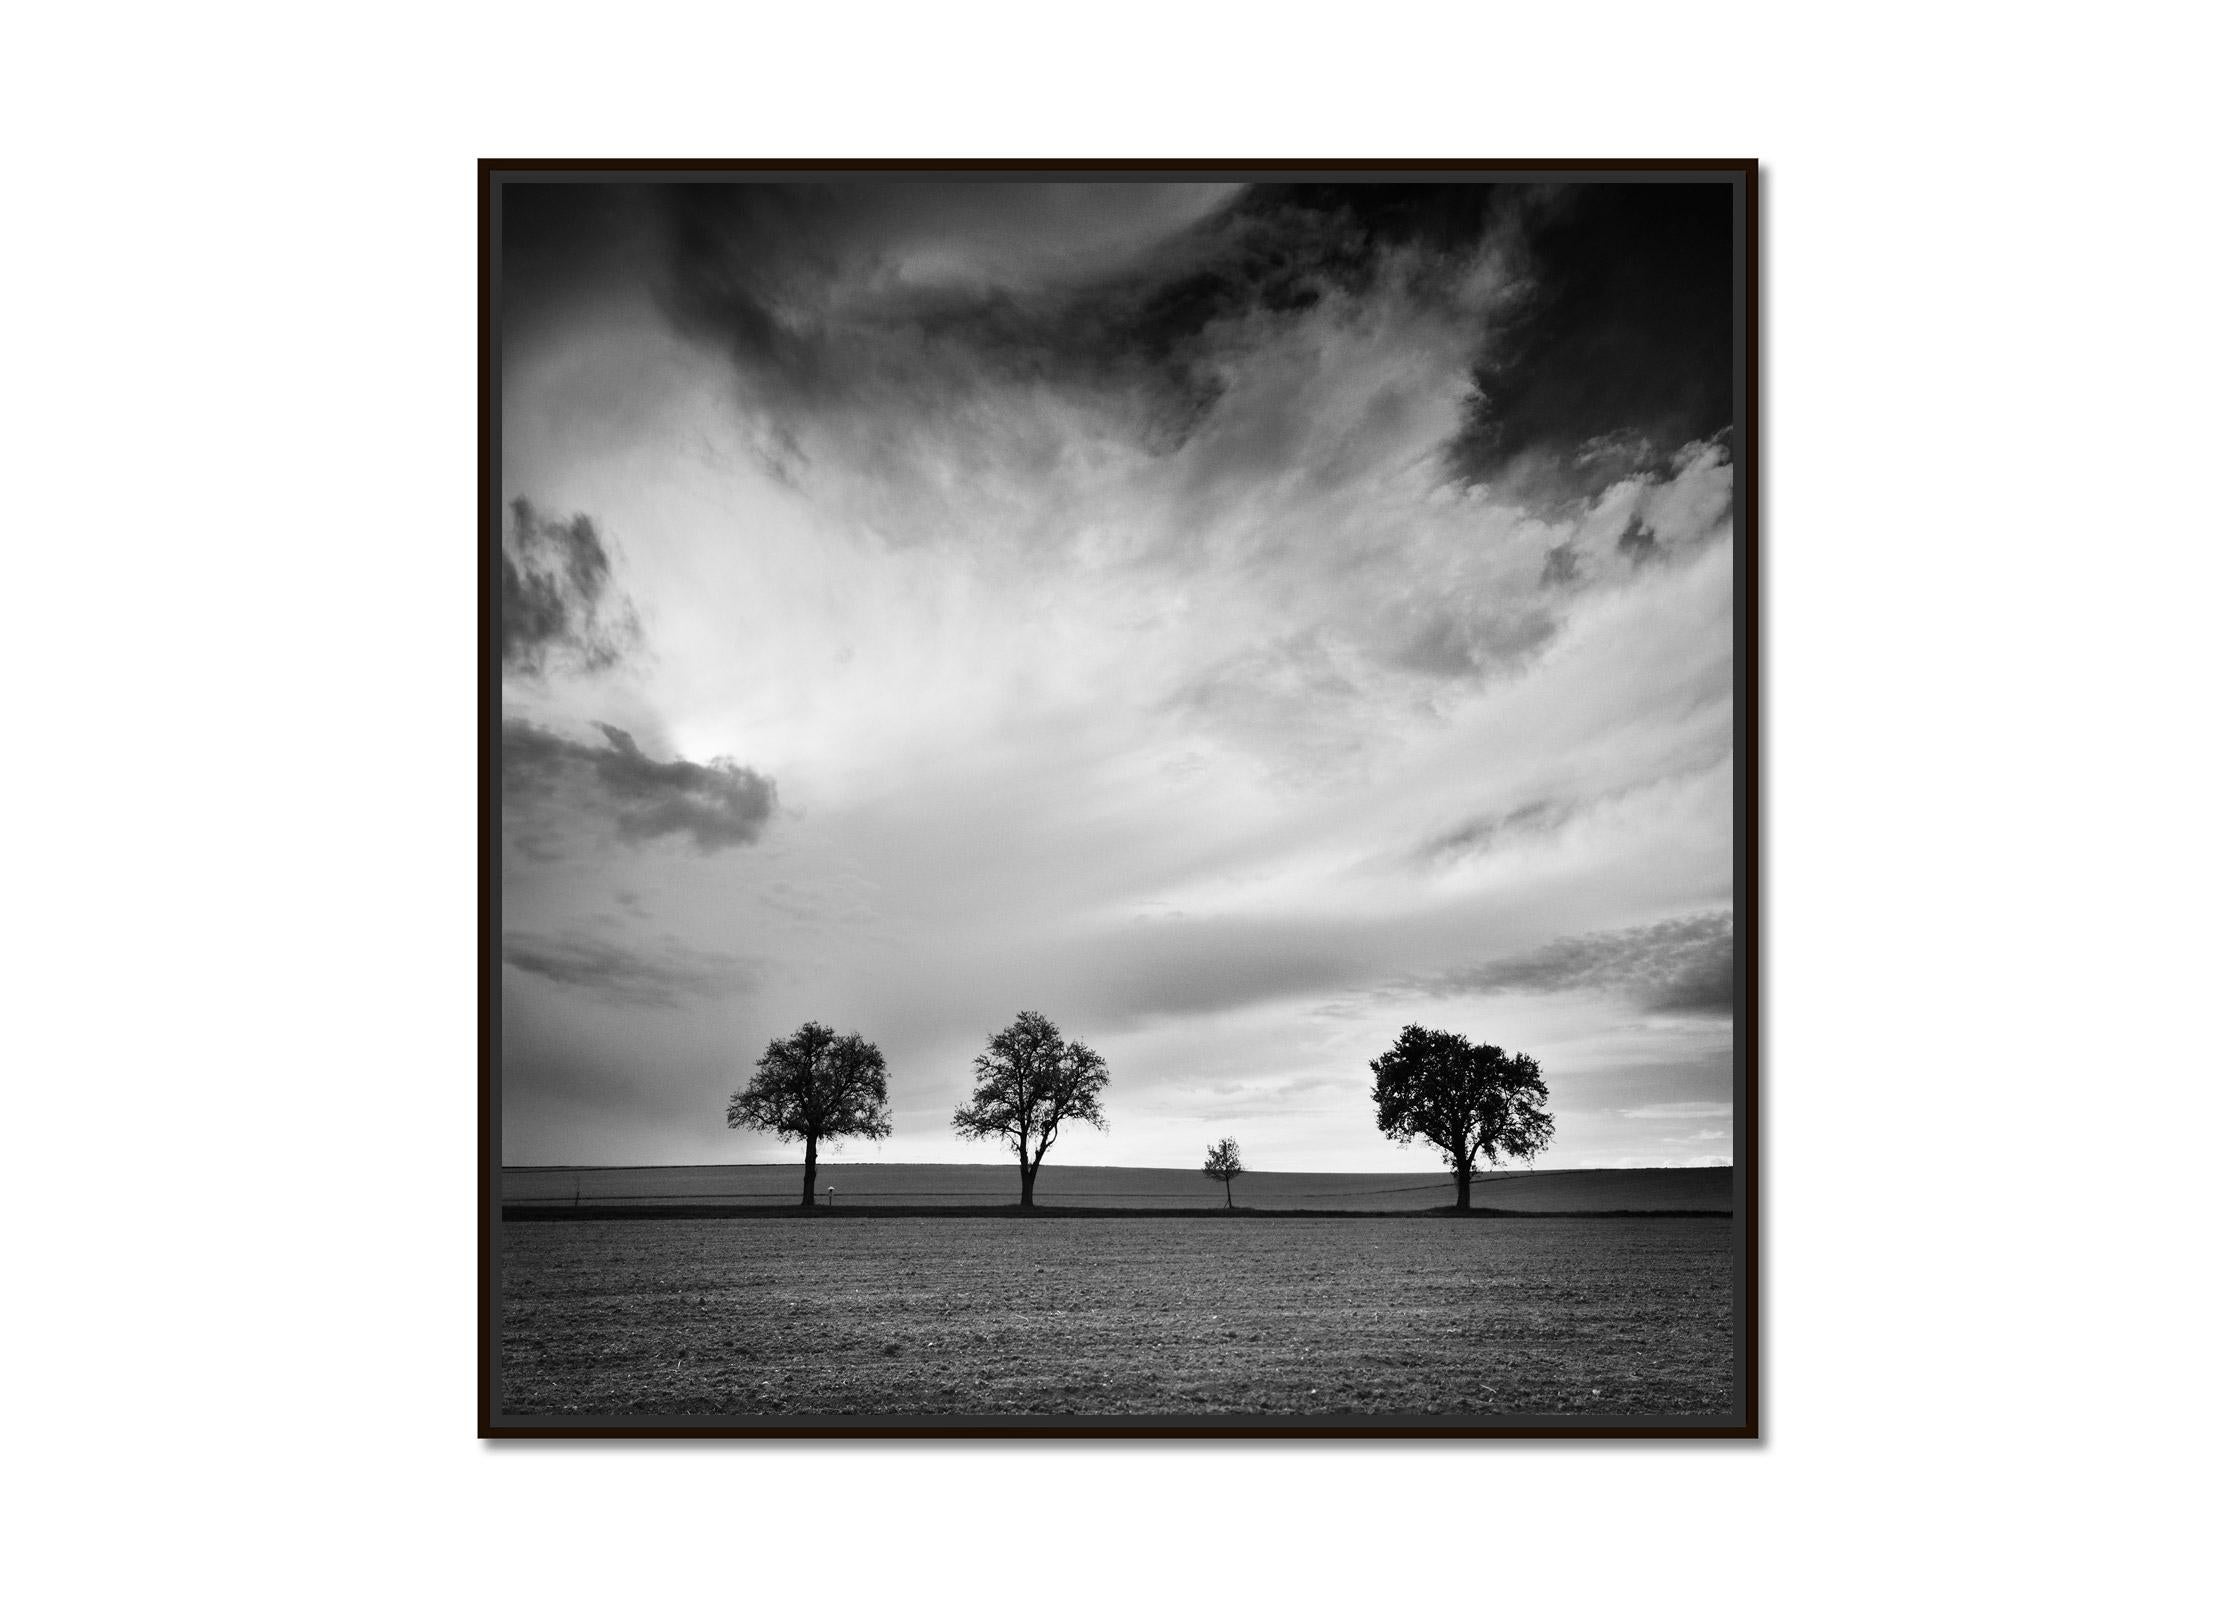 Three and a half Tree, very cloudy, storm, black and white landscape photography - Photograph by Gerald Berghammer